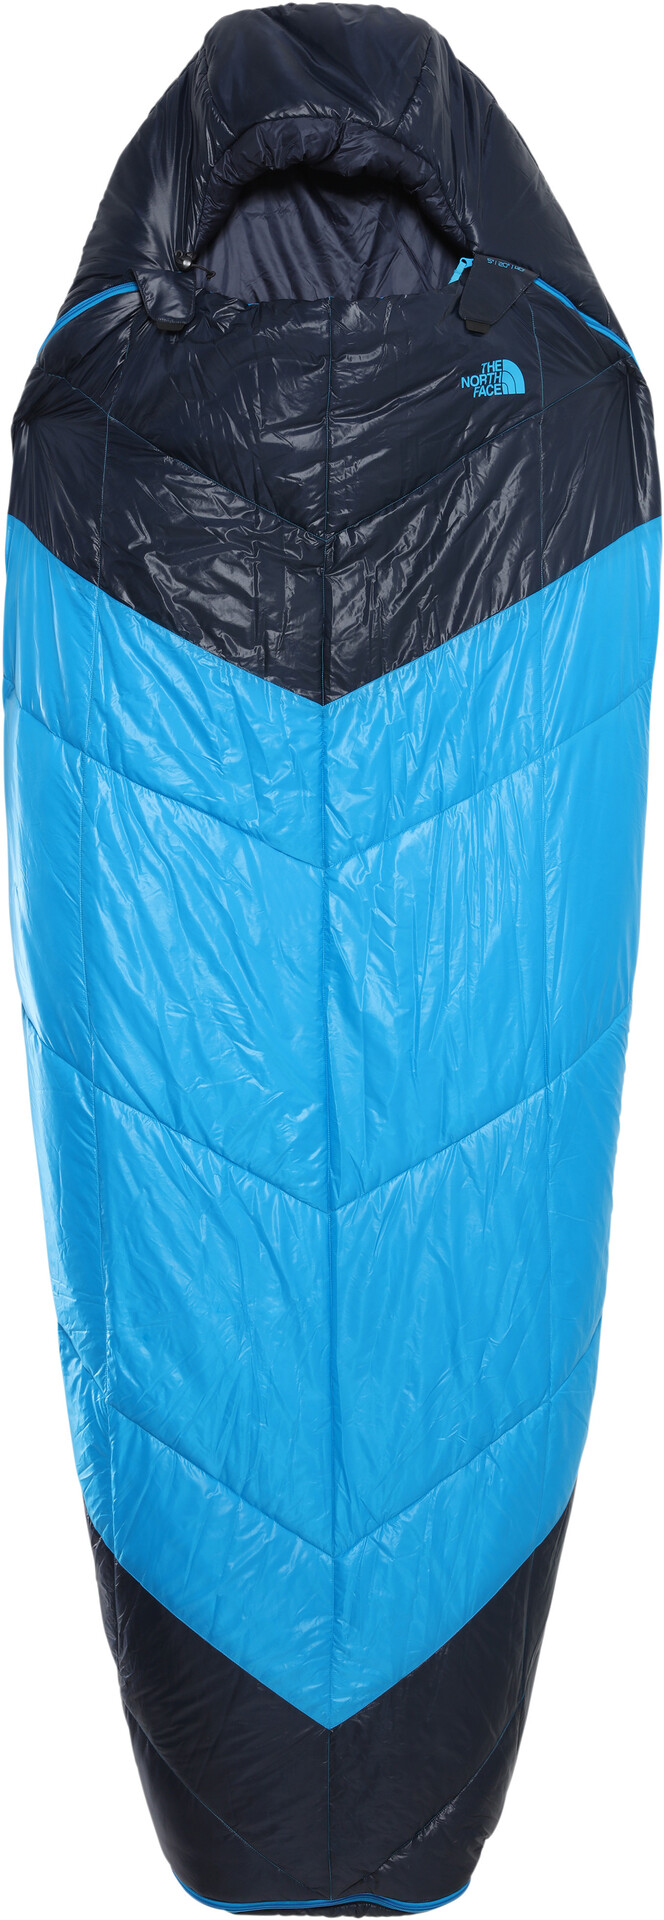 north face one bag